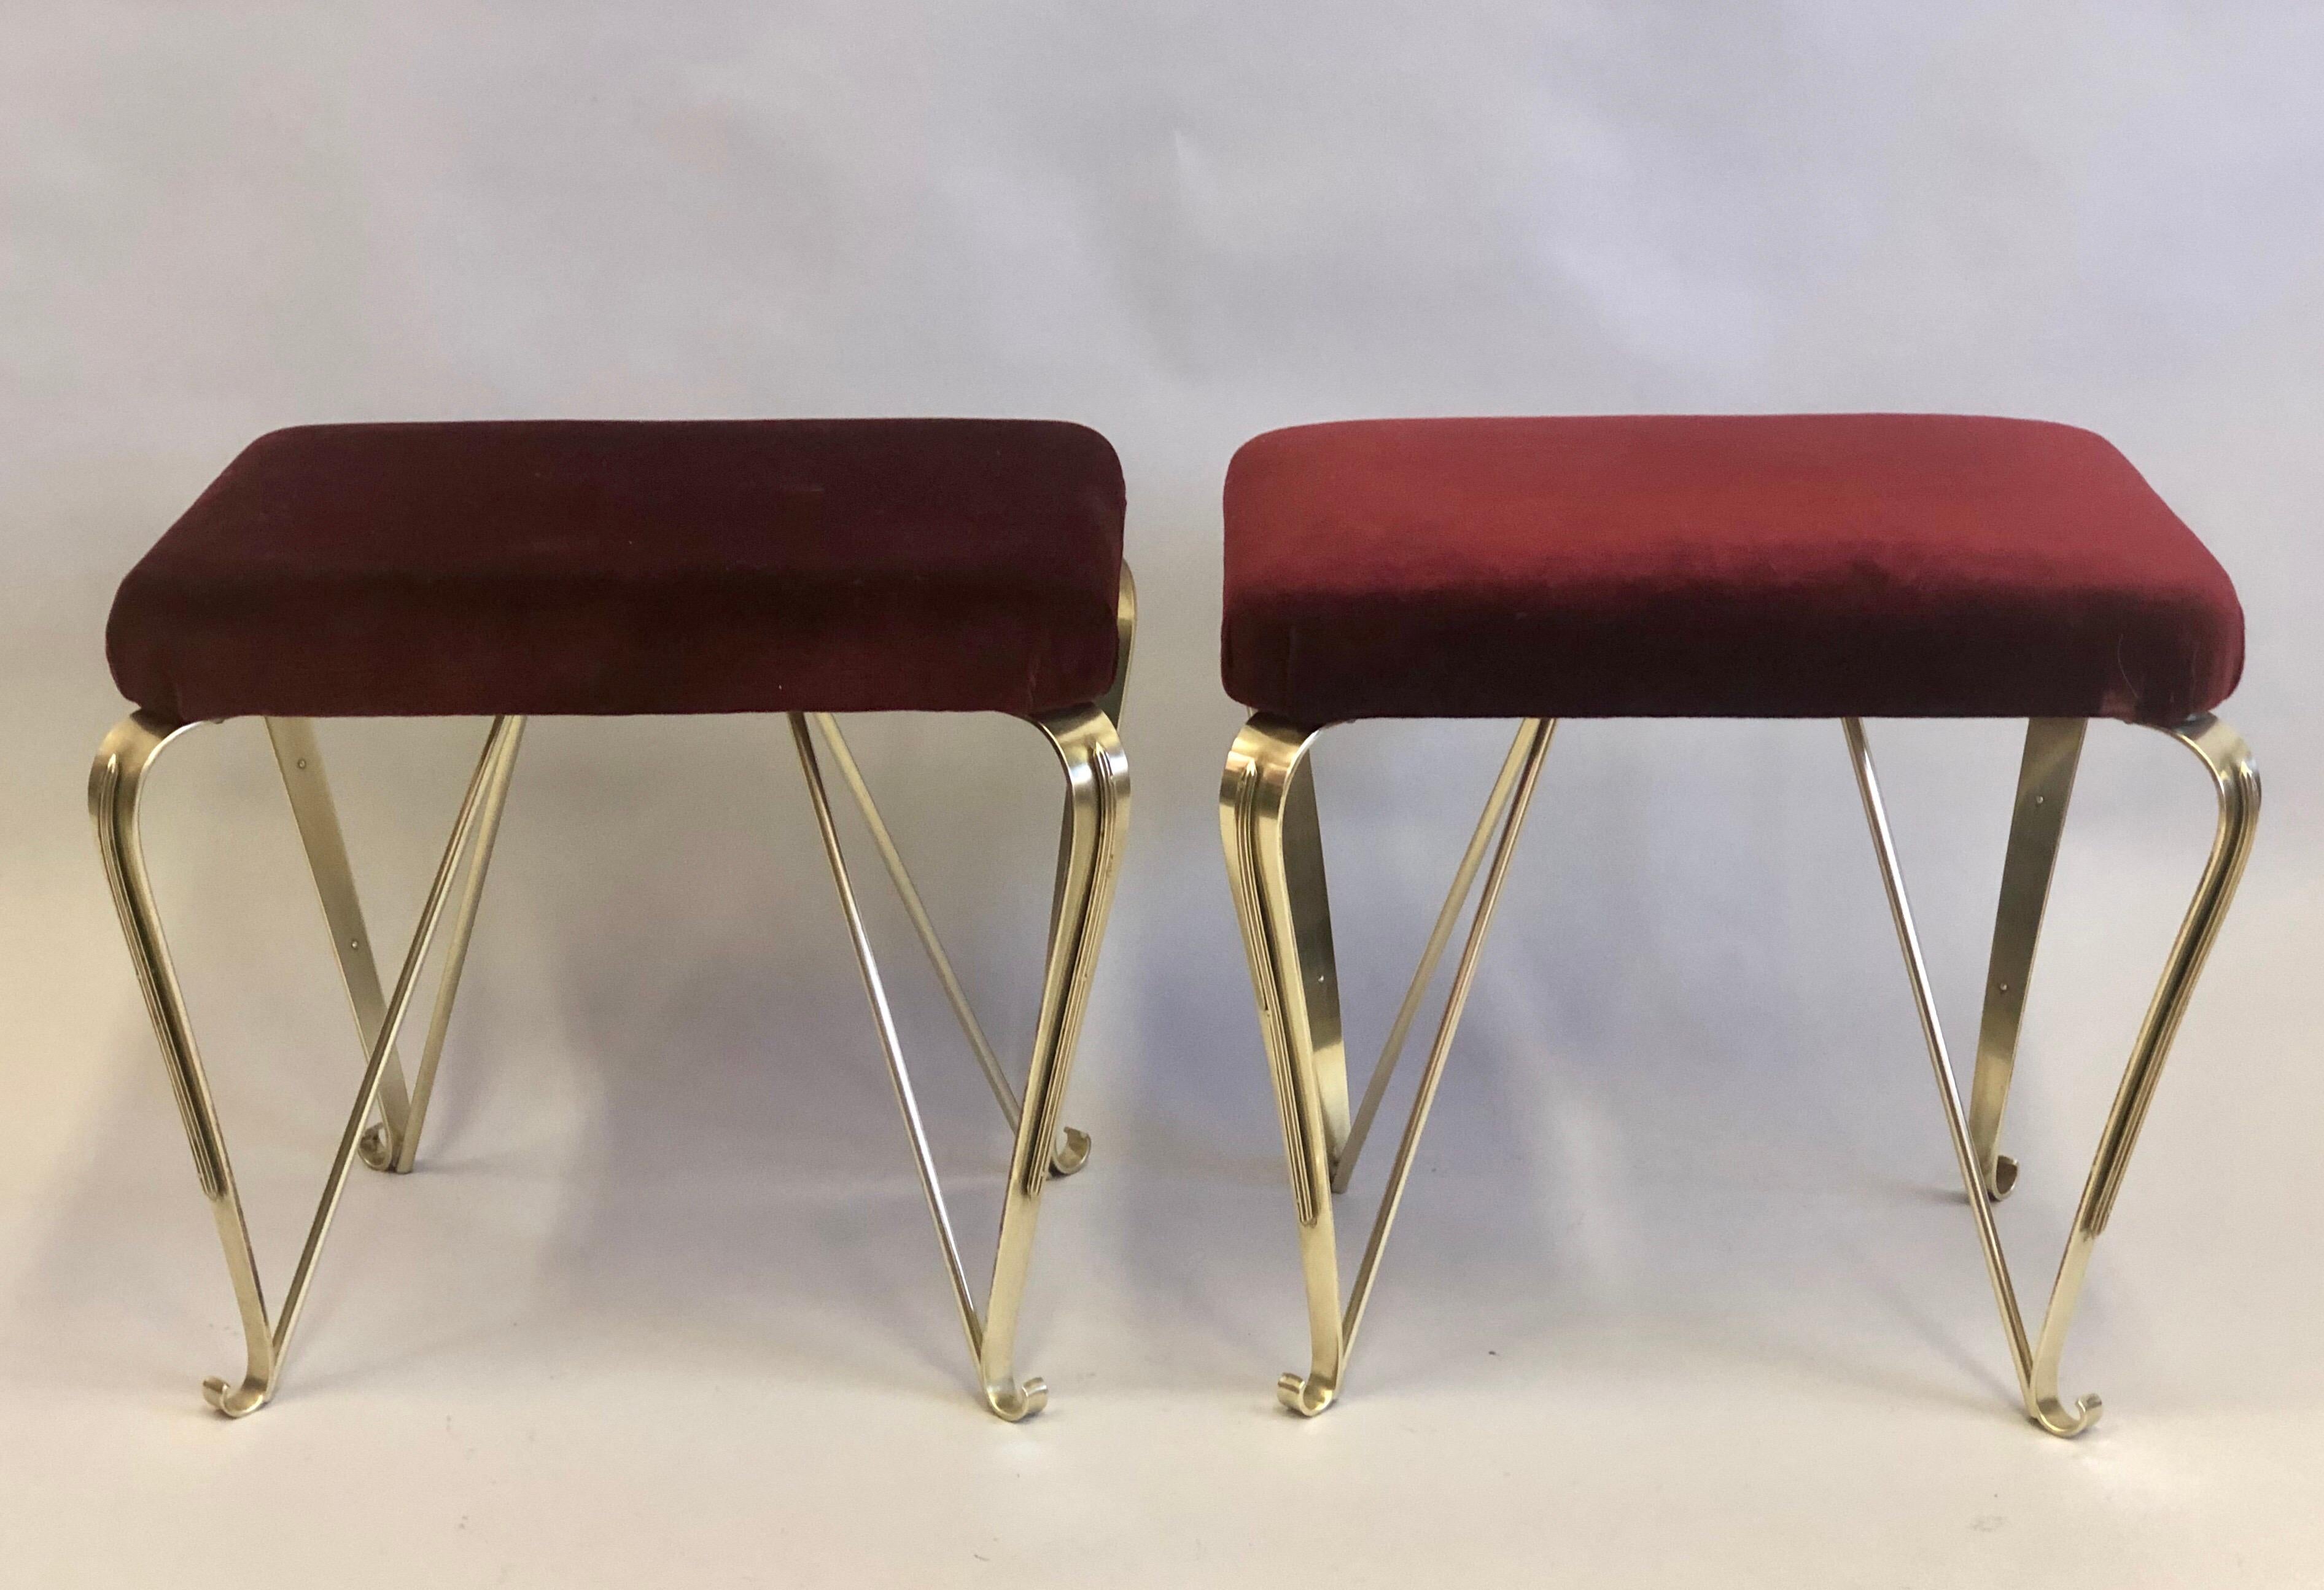 Elegant and rare pair of Italian Mid-Century Modern neoclassical benches / stools in solid brass with upholstered seats by Maison Jansen

The structure is composed of solid brass featuring 4 legs splayed on an angle and tapered delicately; they